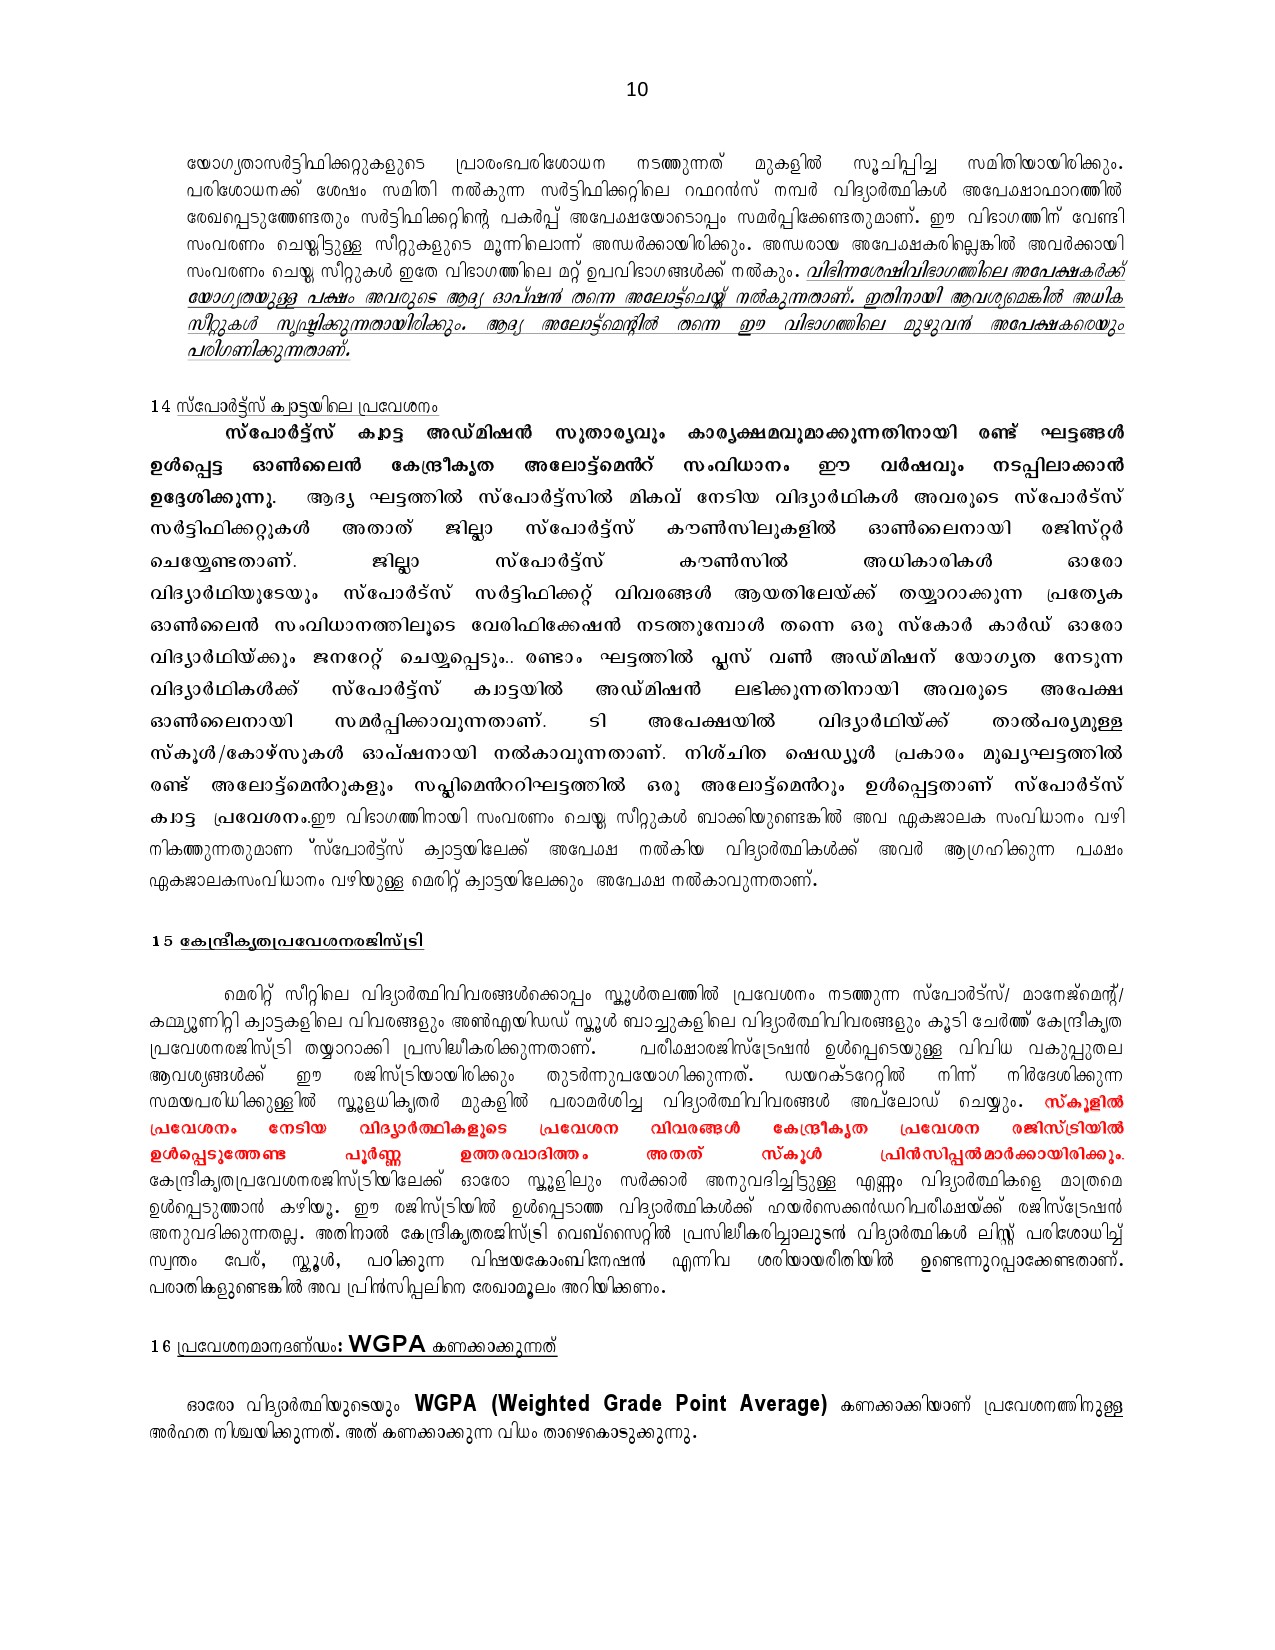 How To Apply For Kerala Higher Secondary Admission 2019 - Notification Image 10